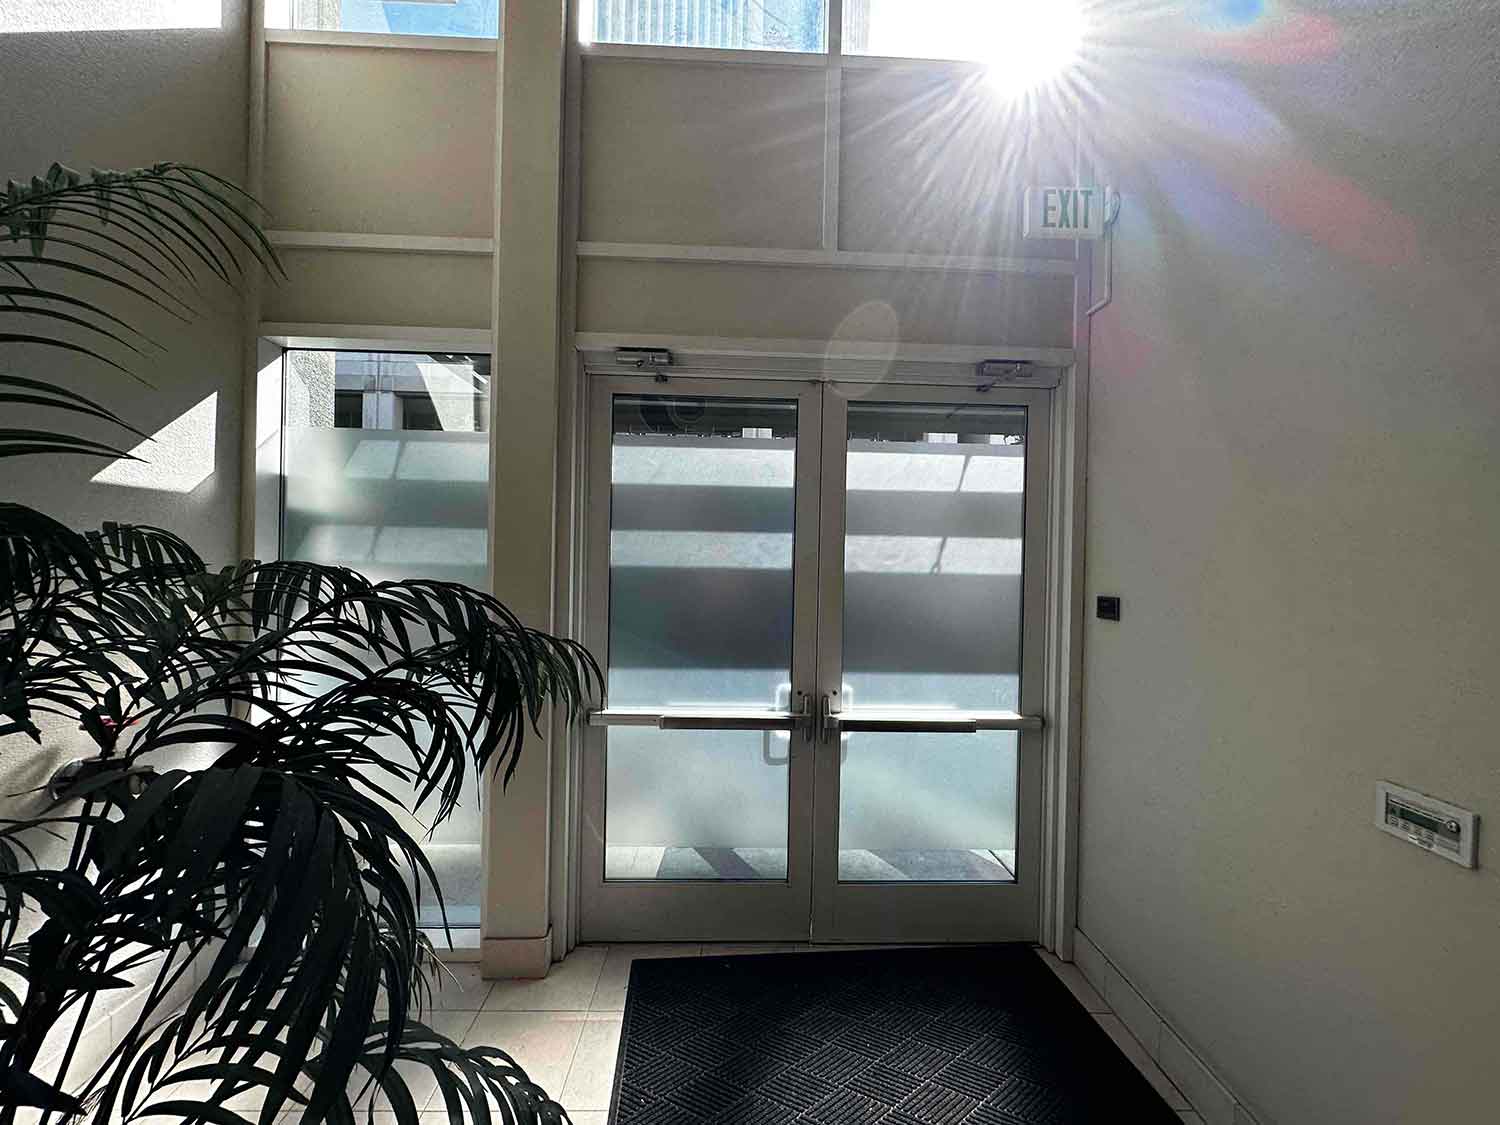 Privacy Window Film and Tinting for Oakland, CA. Offices, Shops, and Storefronts by ClimatePro.